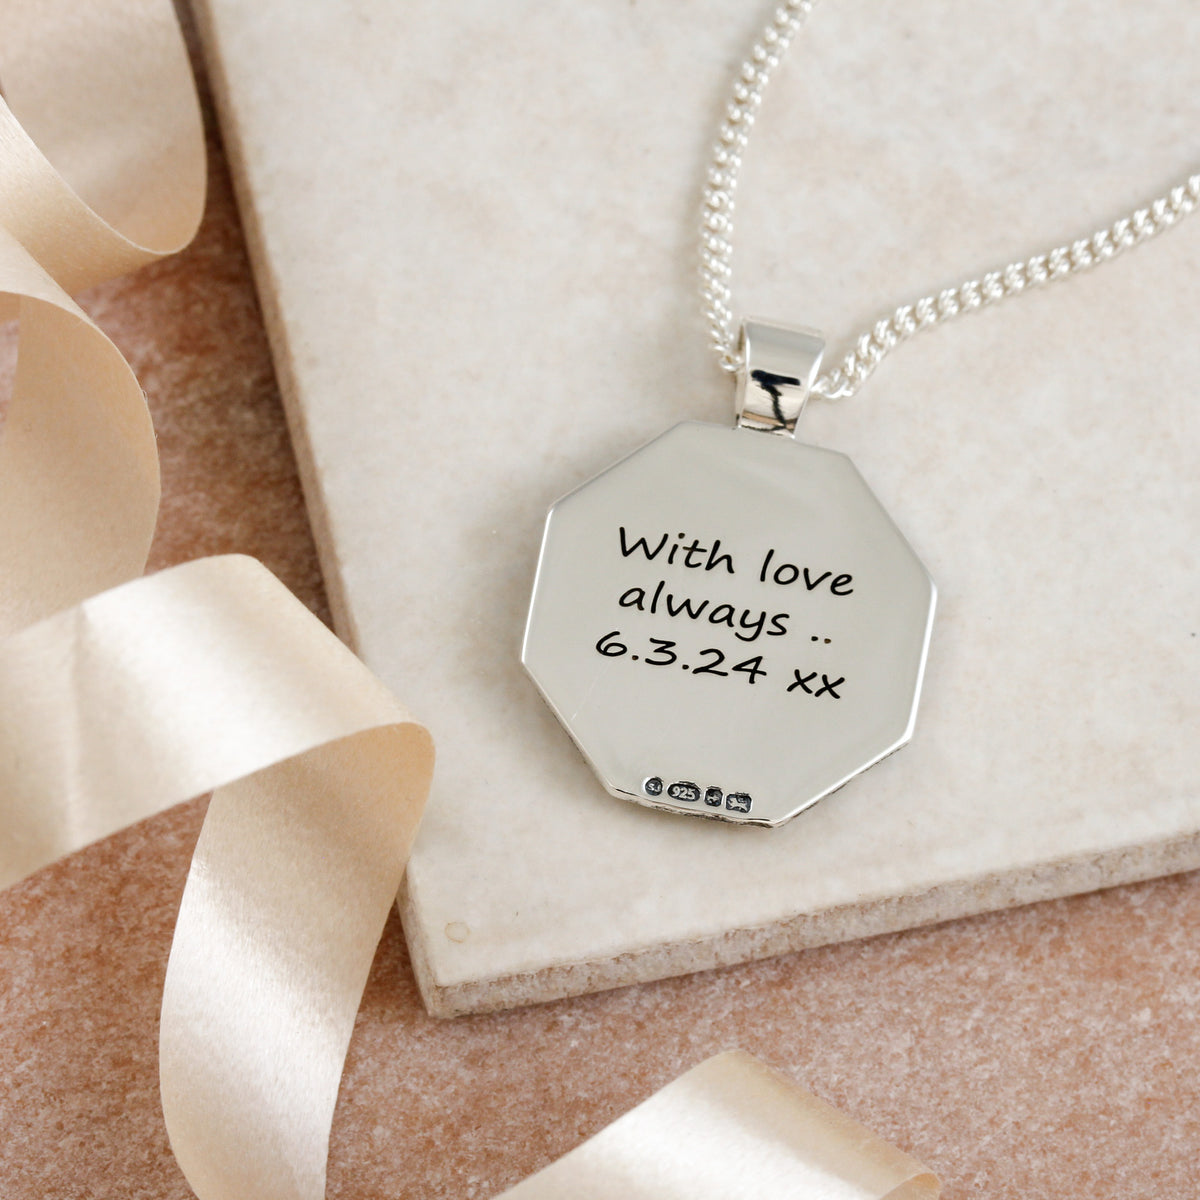 with love always engraved back of lucky pendant